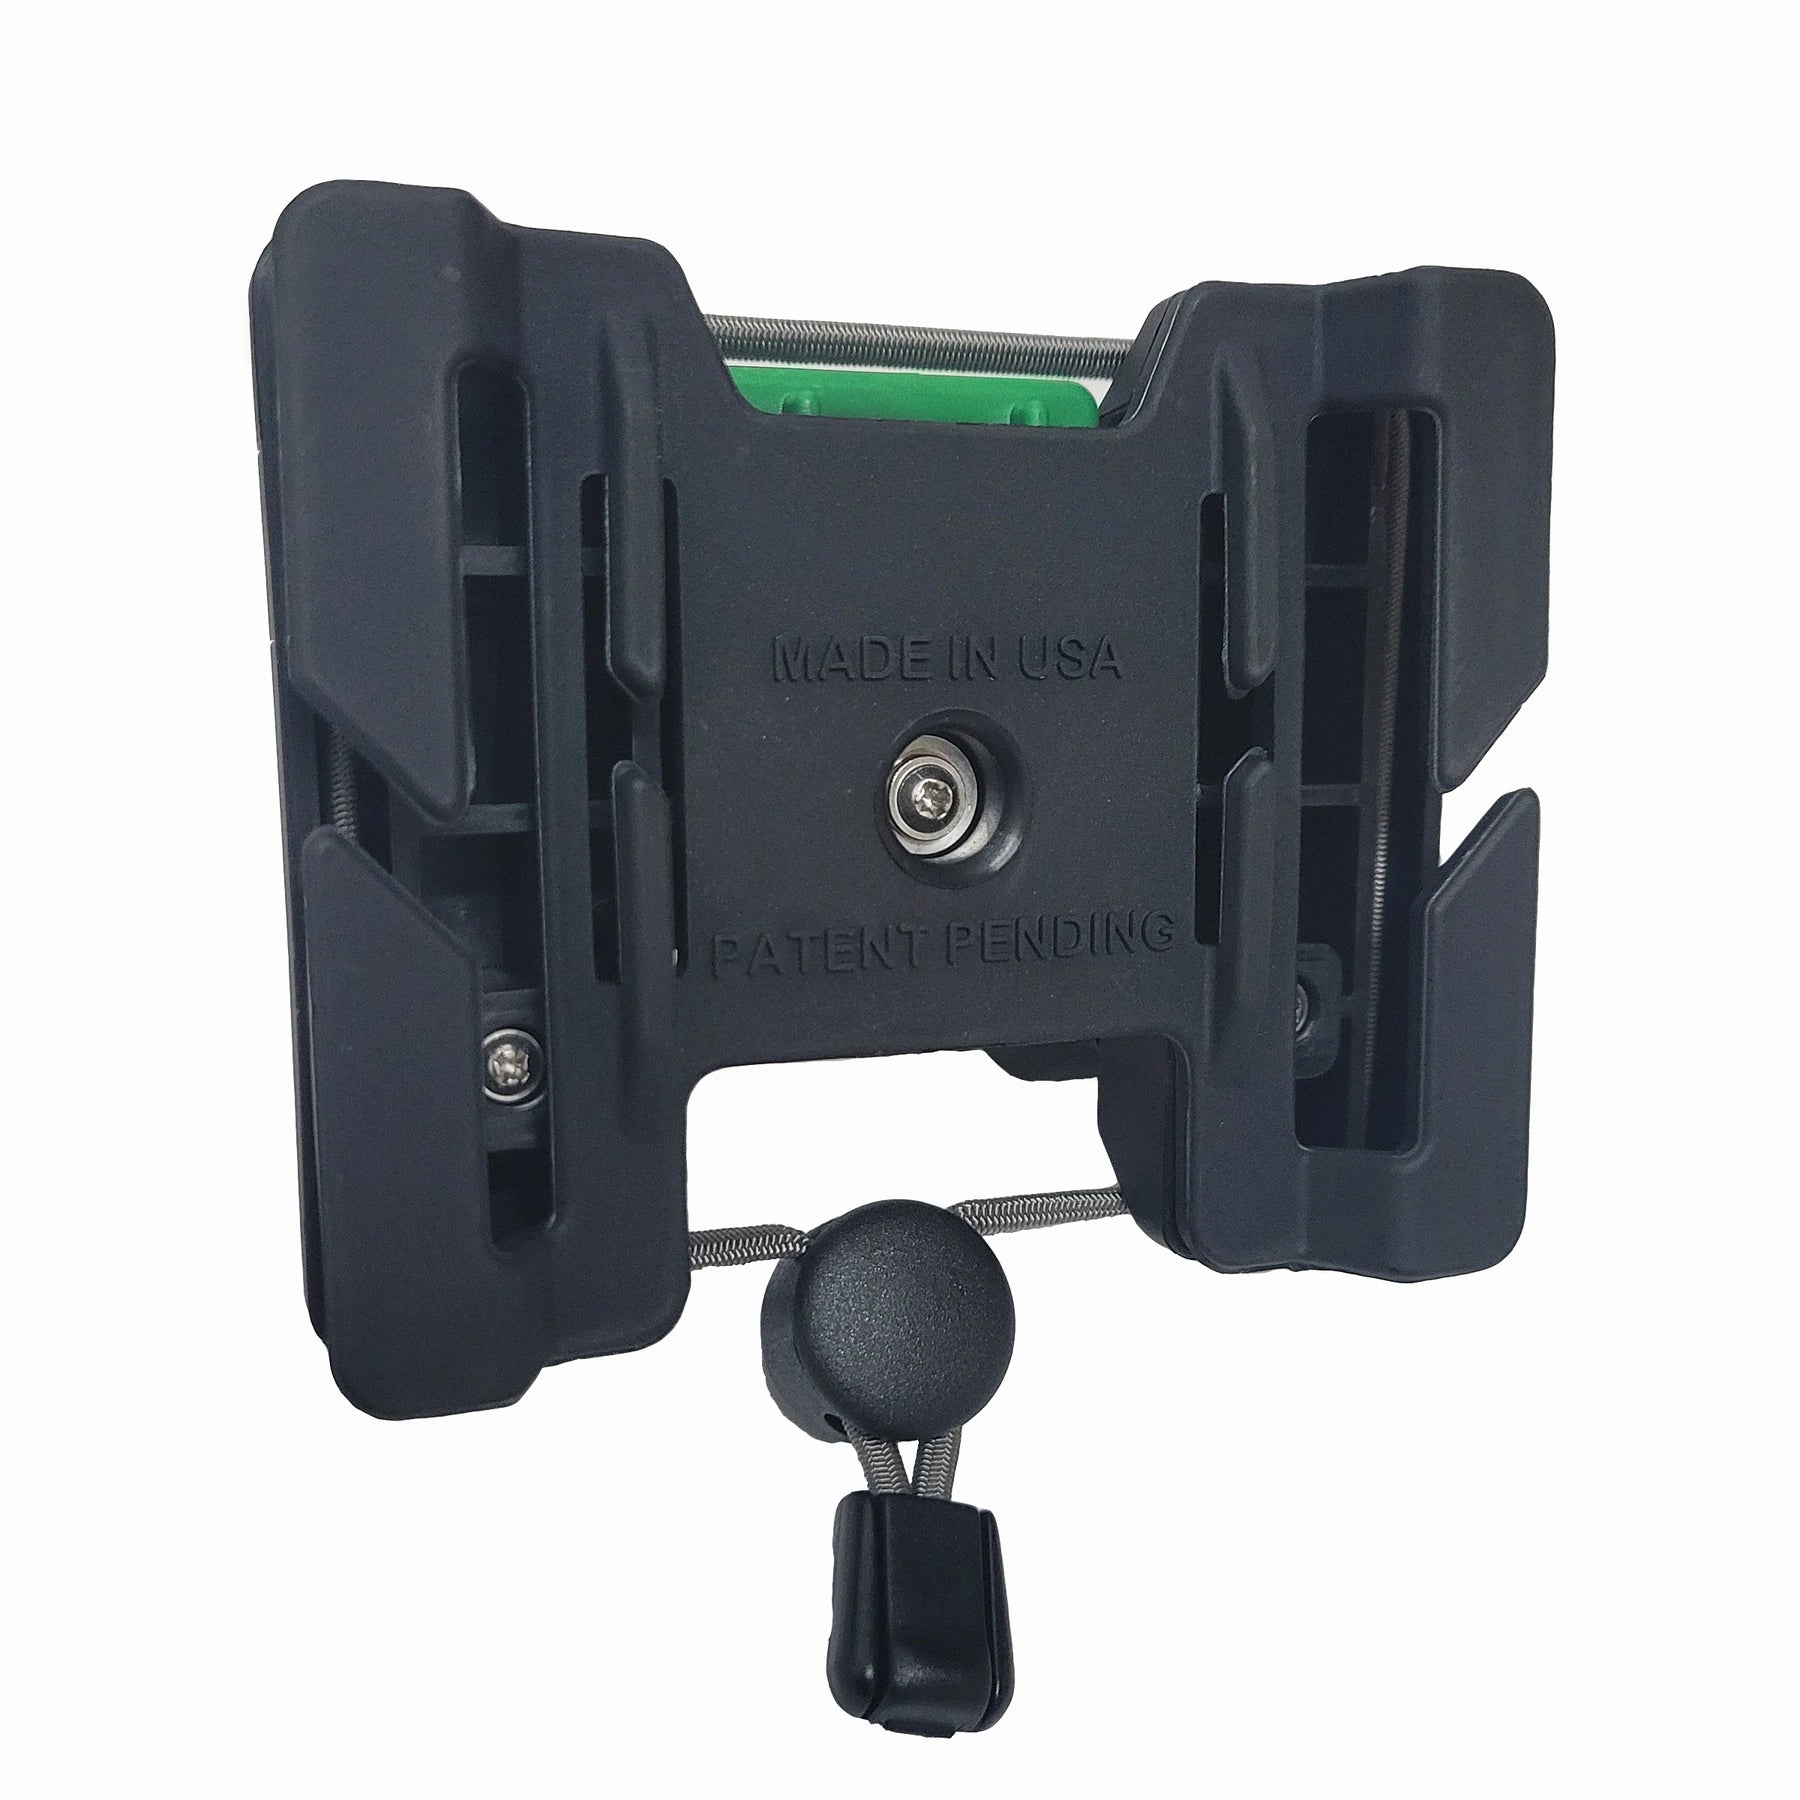 O'Pros 3rd Hand Belt Clip Fly & Spin Rod Holder - Upavon Fly Fishing